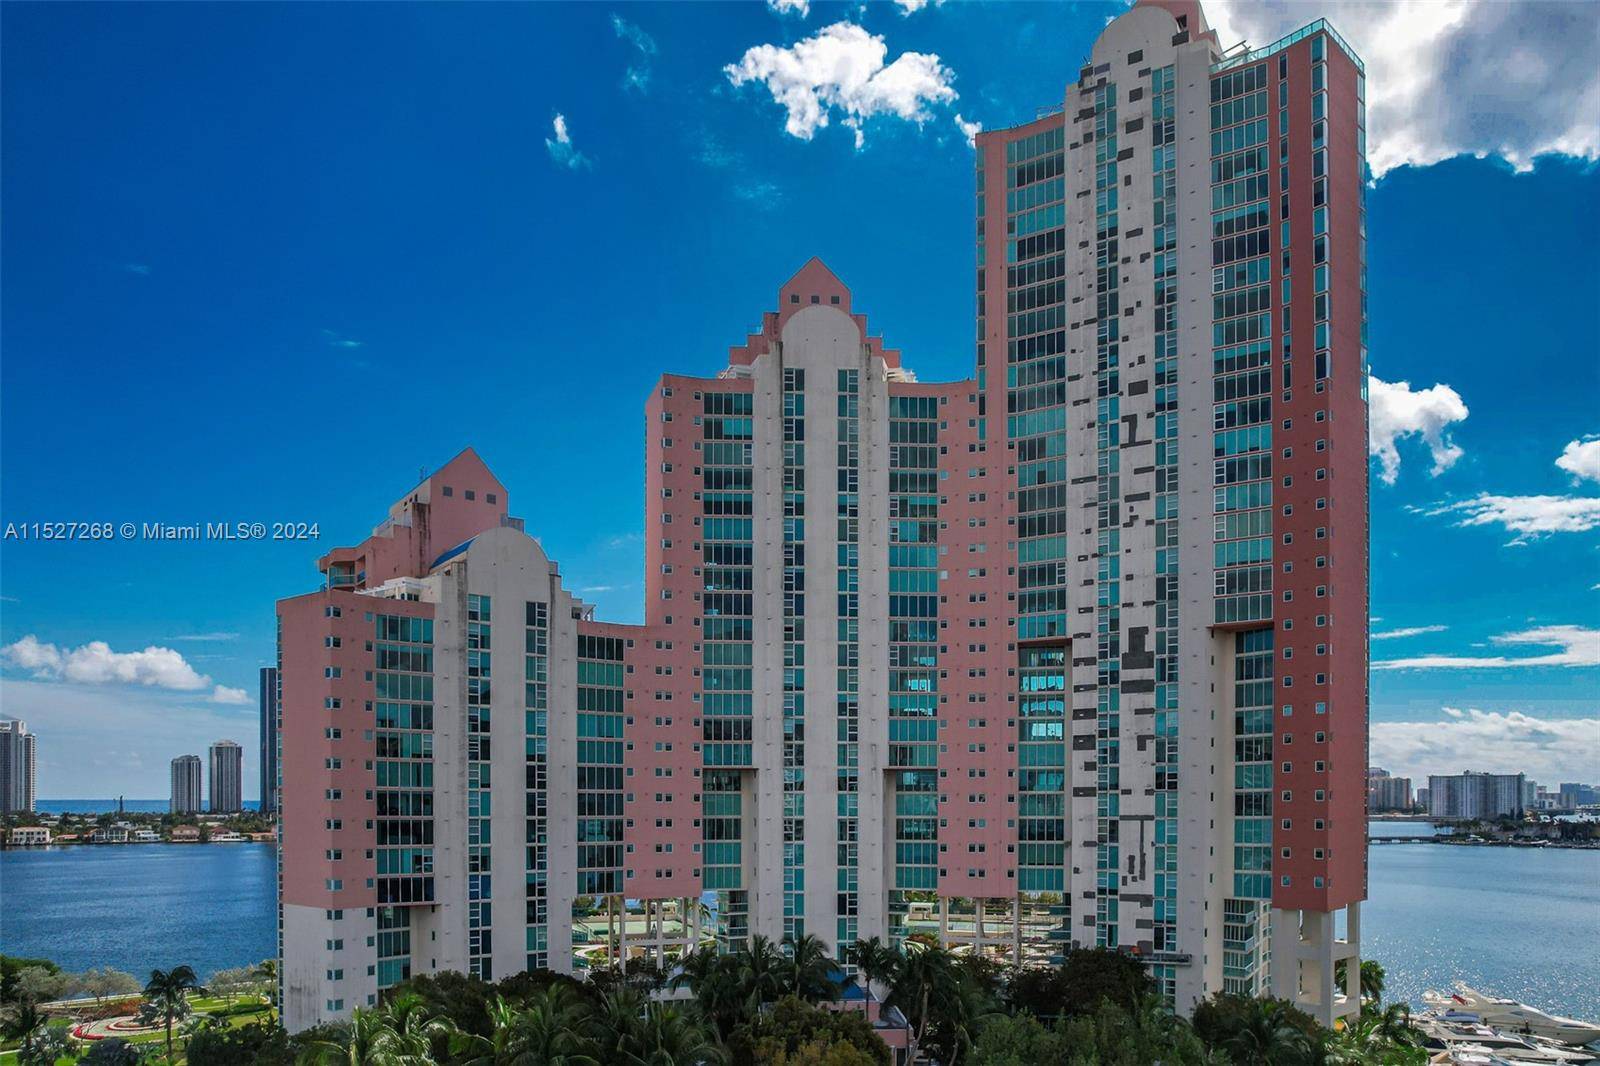 Large unit with magnificent views of the bay, skyline and city in Aventura.